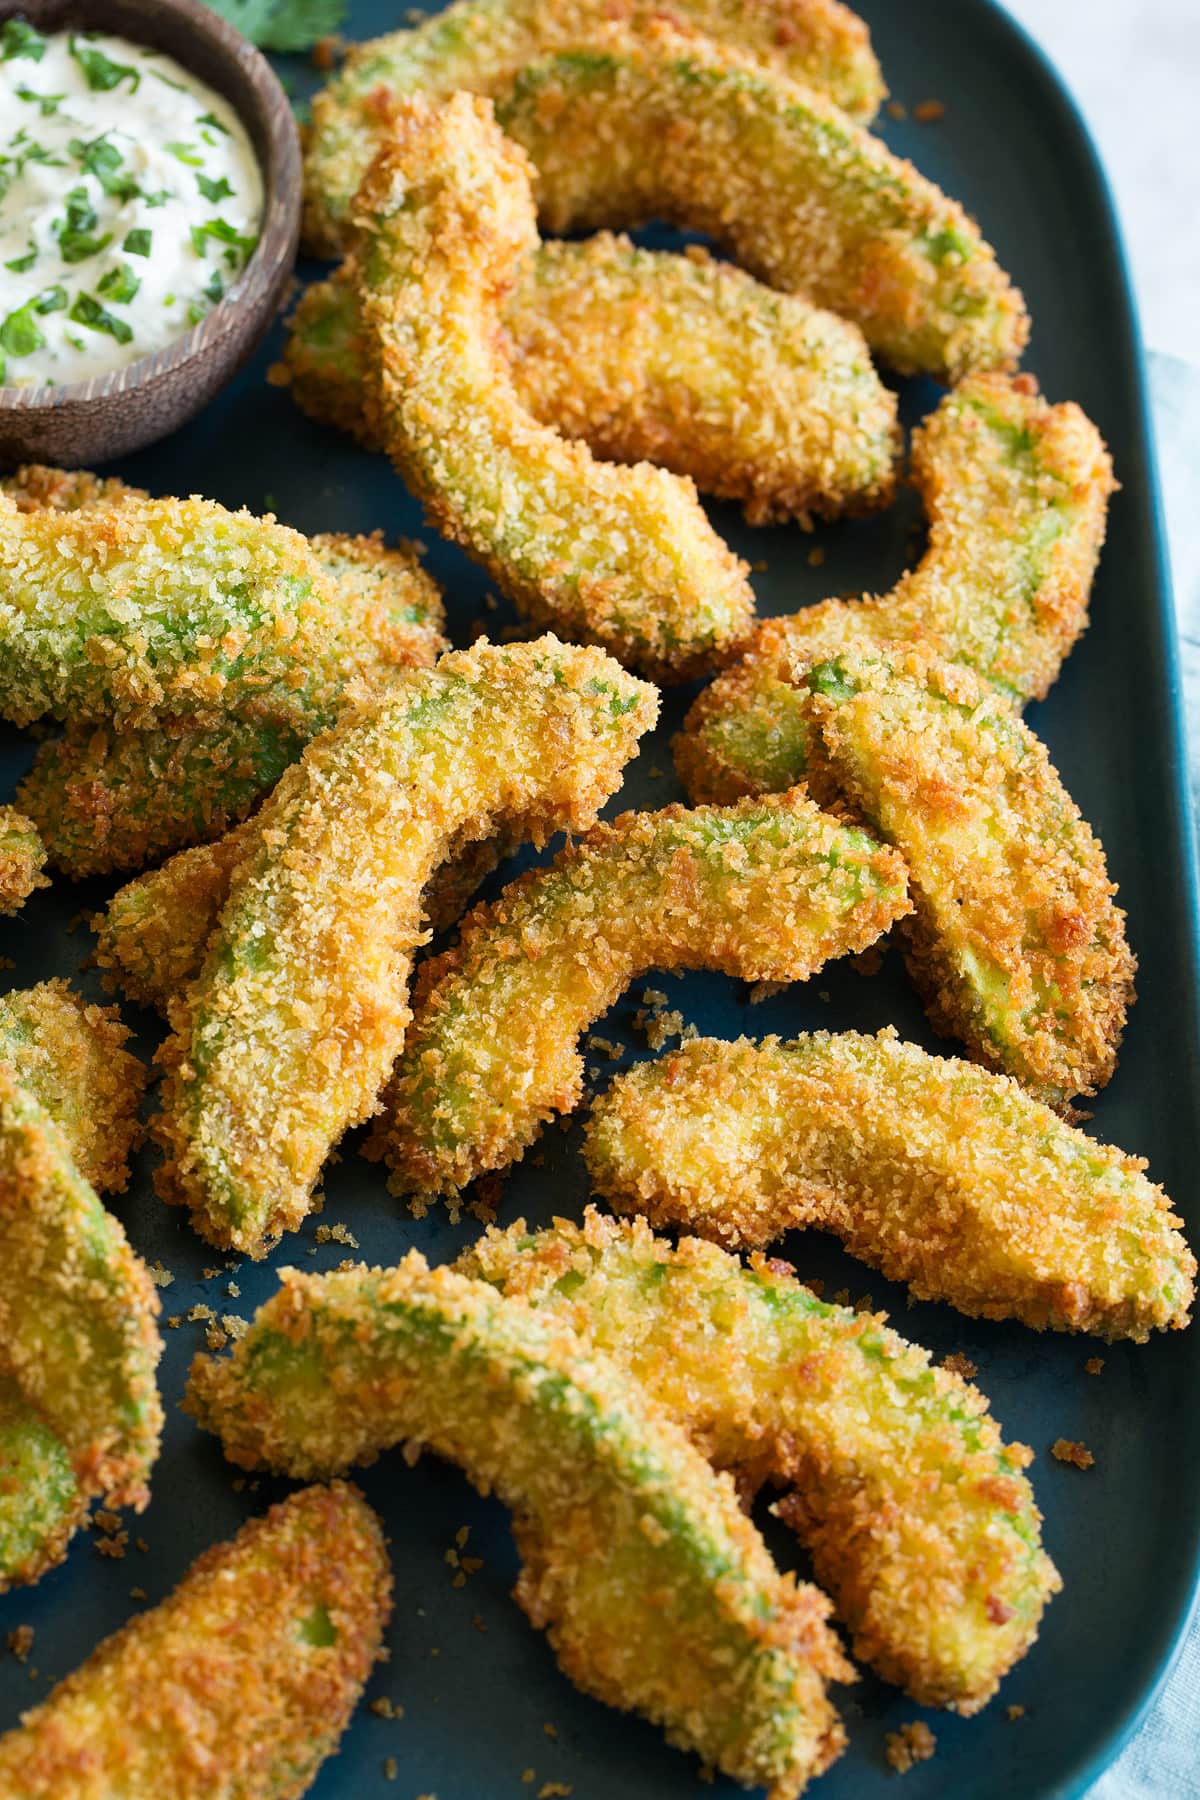 Avocado fries shown piled on a platter from a side angle.